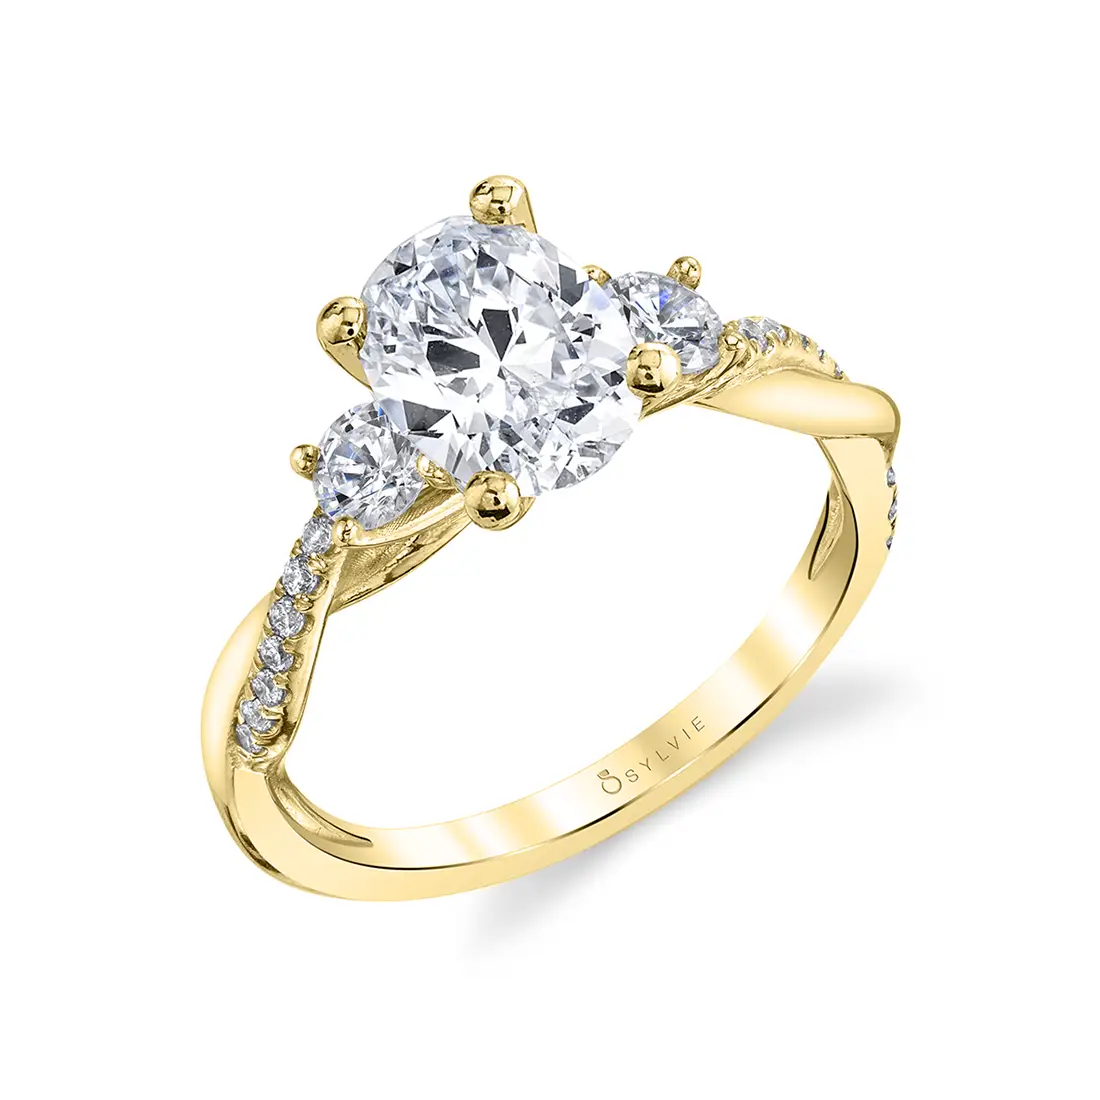 3 stone oval engagement ring with round side stones in yellow gold - Style 